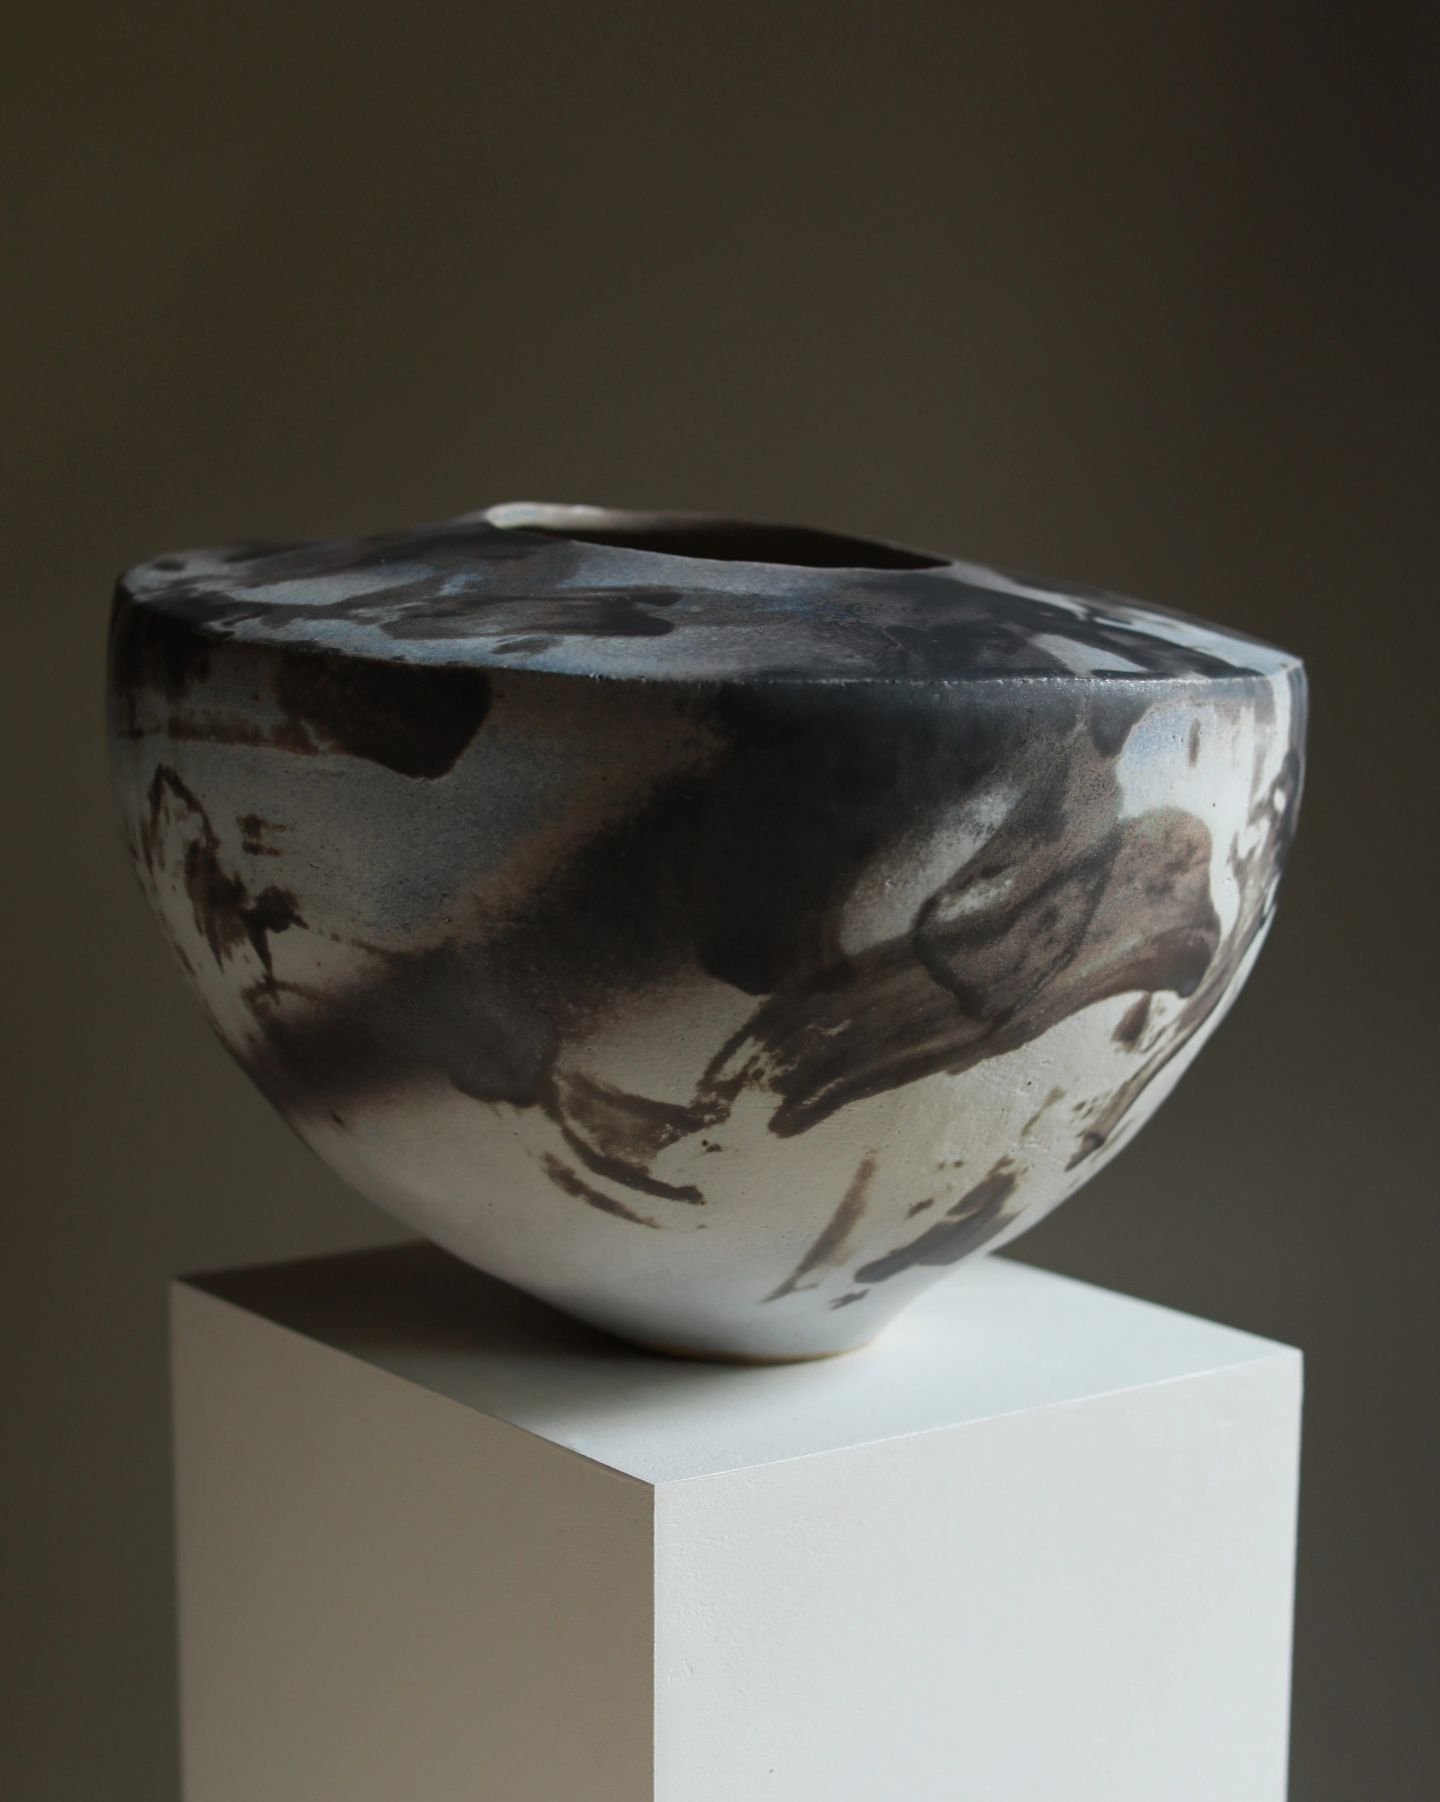 'Untitled Mess' - well, aren't we all a bit?
Stoneware and layered glazes that feel like I wanted to do some graffiti. Also, remember I was unsure about it after the firing? Well, it really changed to: me loving it. Now, wondering how can I make this